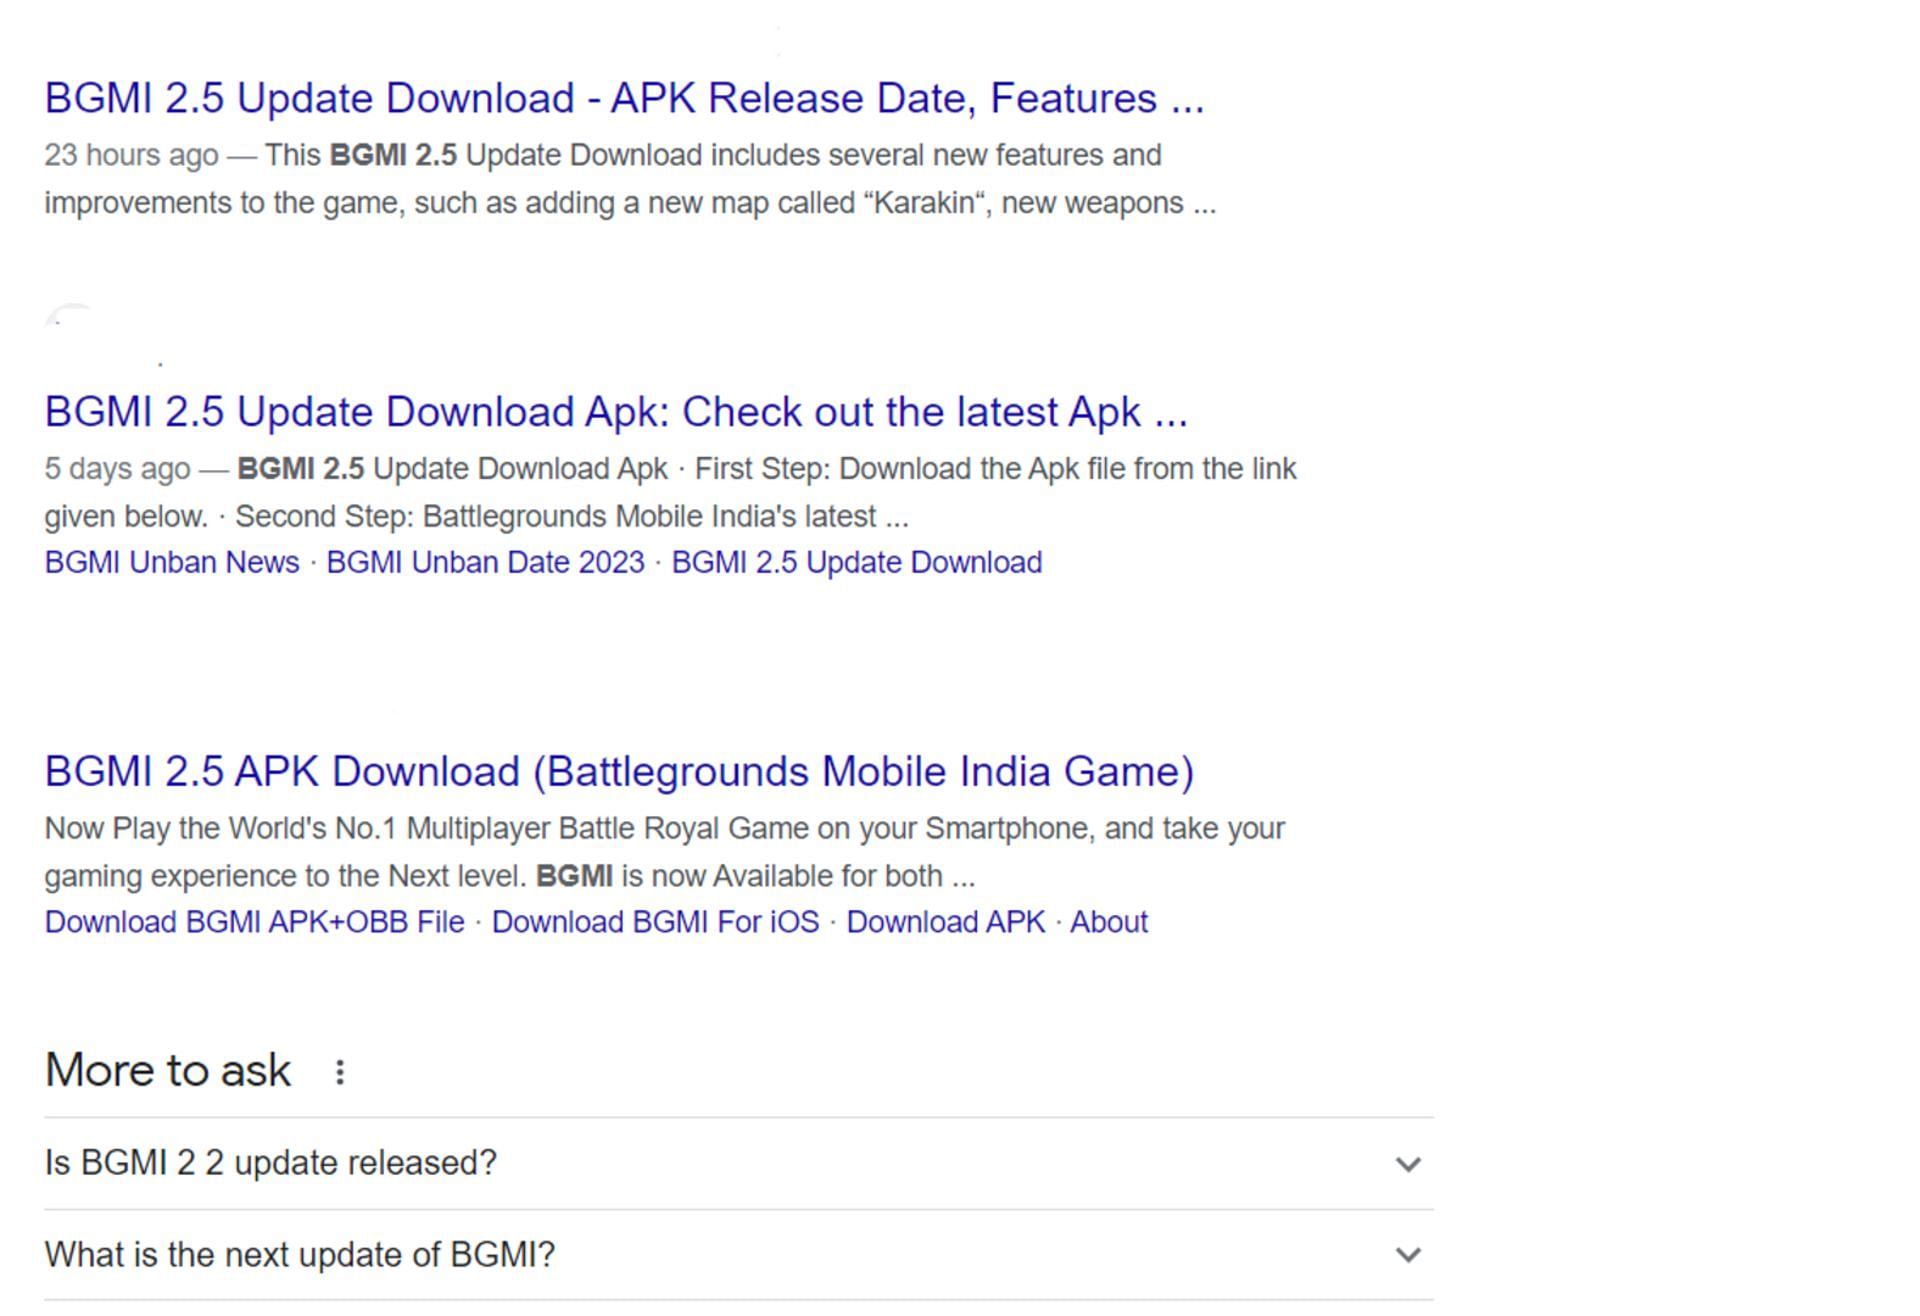 APK download links for the 2.5 version are already available on multiple websites (Image via Google)